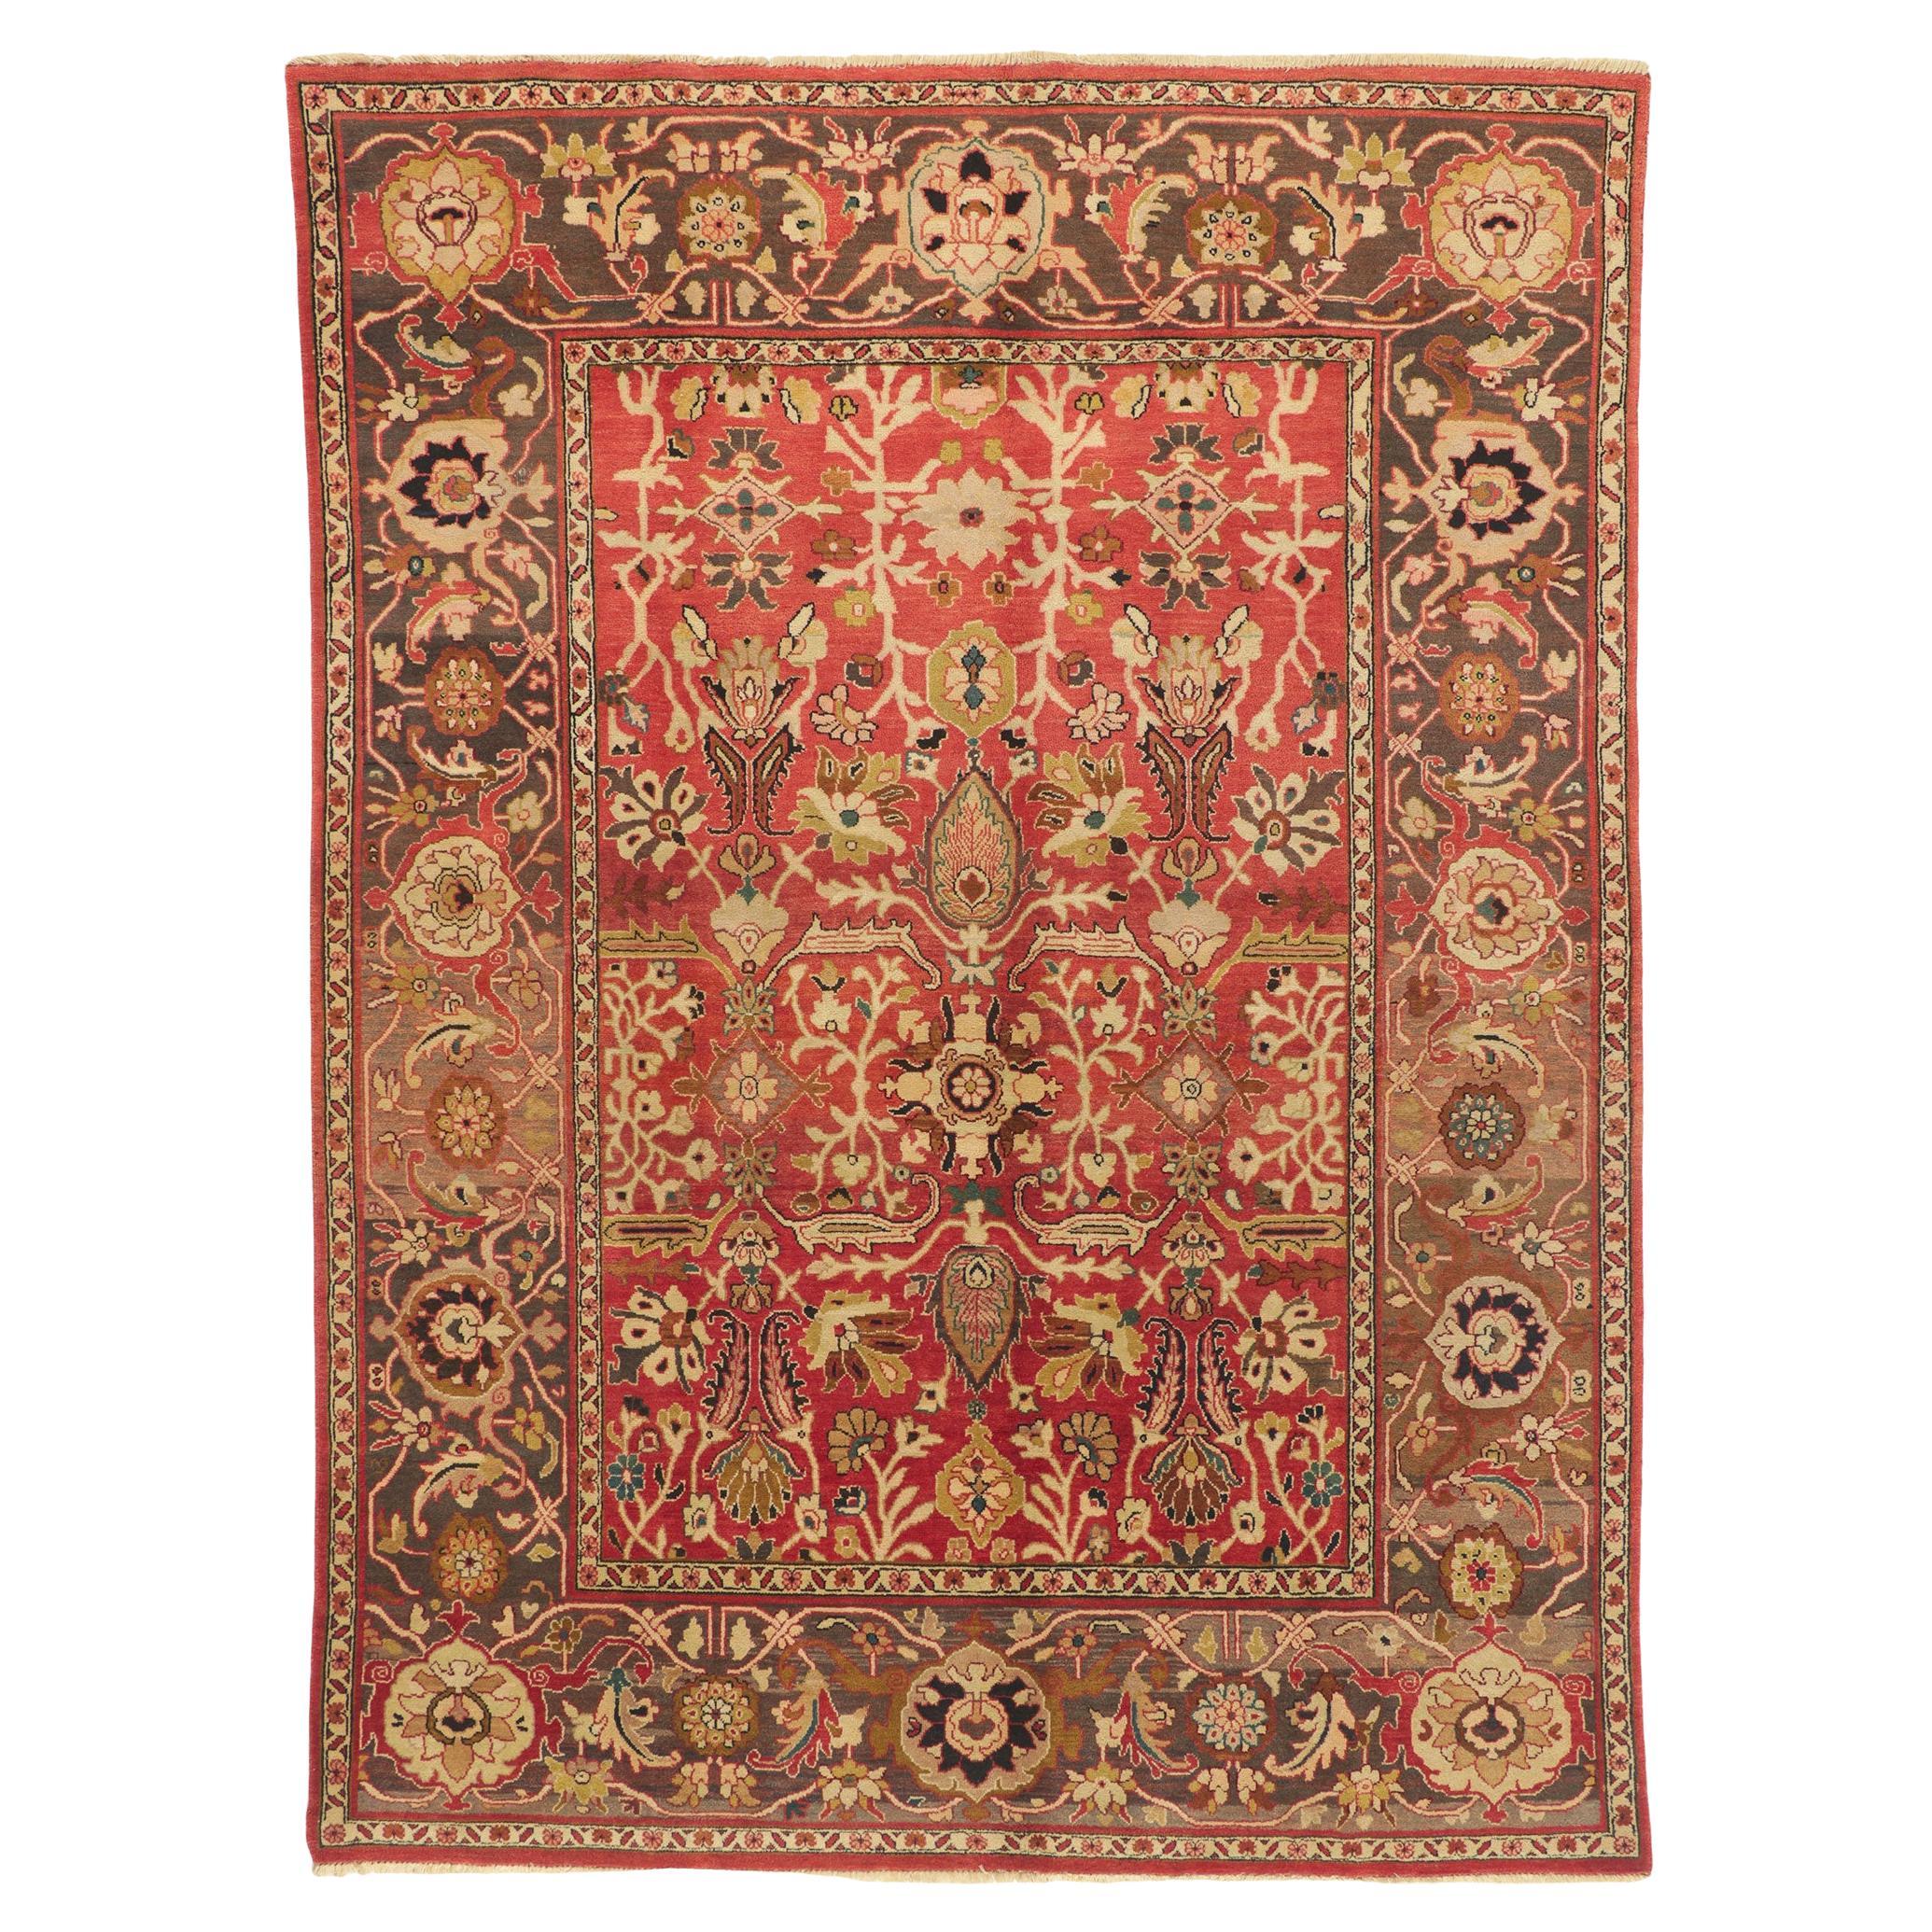 Vintage Indian Mahal Rug with Warm Earth-Tone Colors For Sale